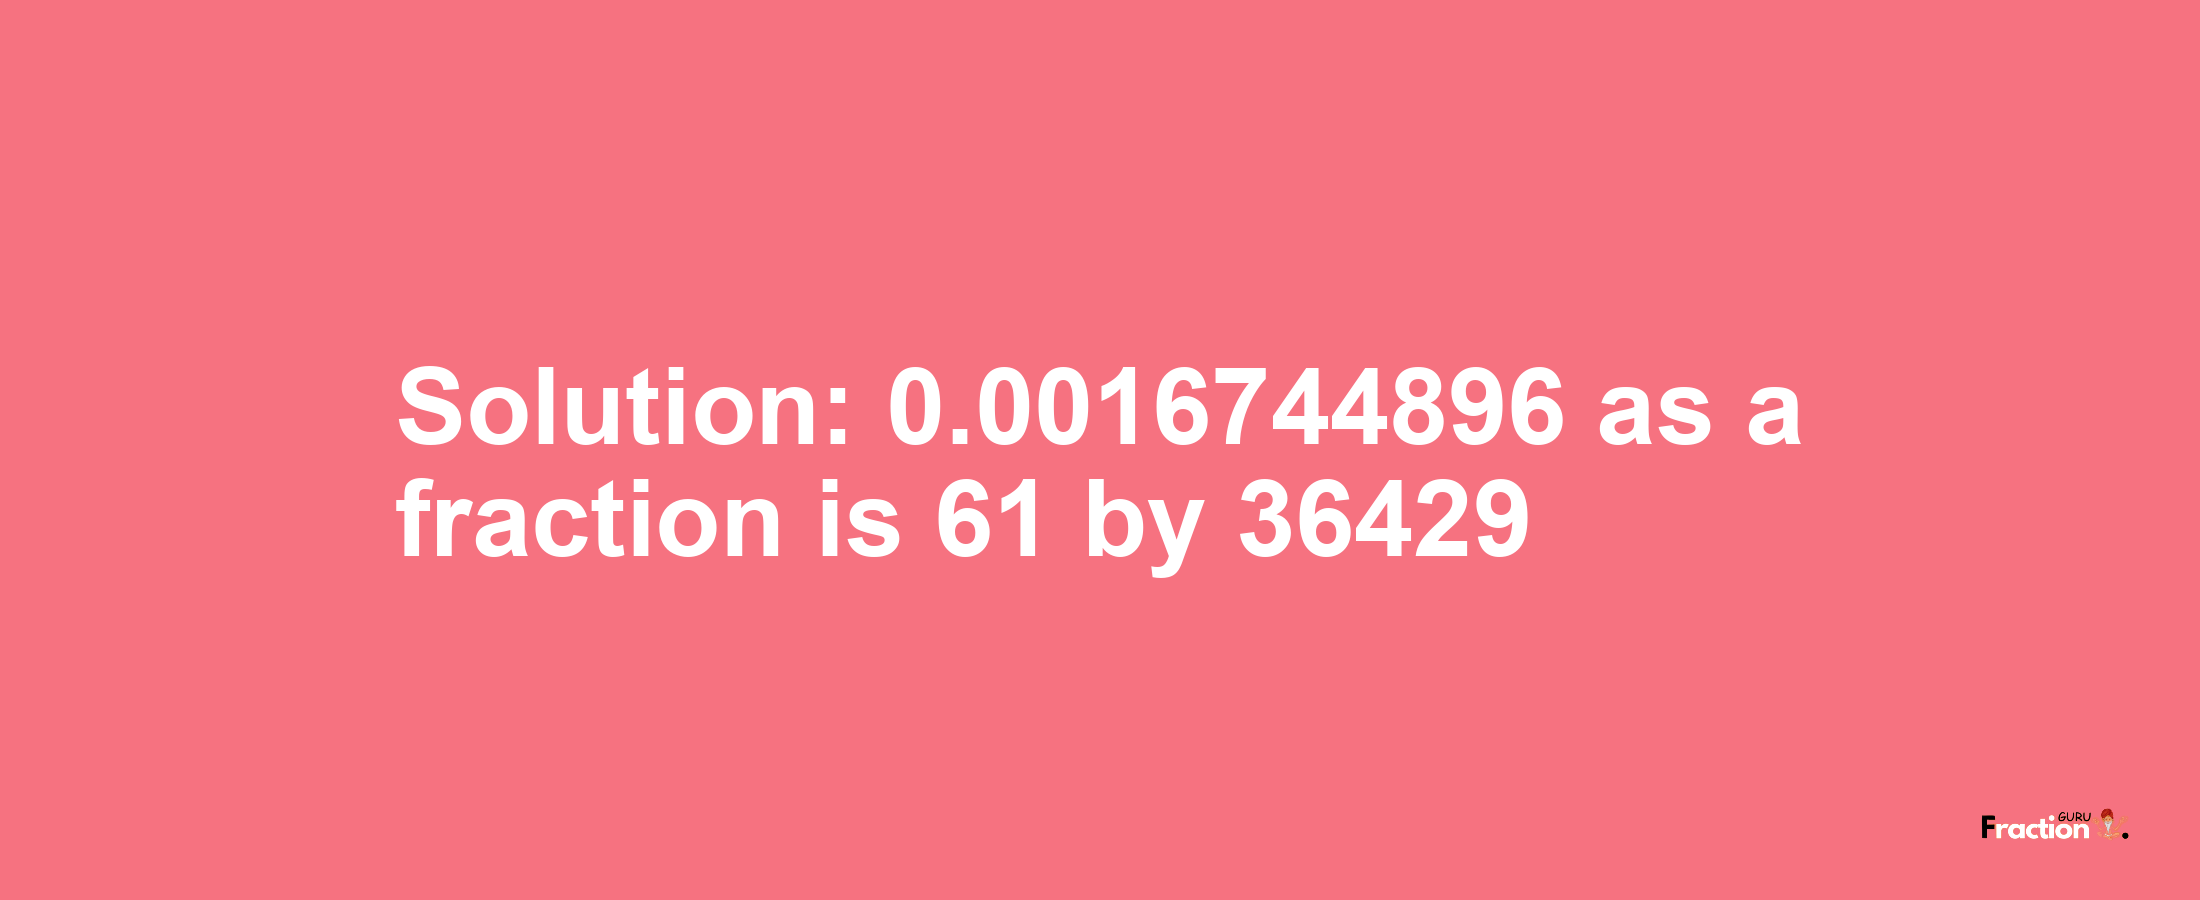 Solution:0.0016744896 as a fraction is 61/36429